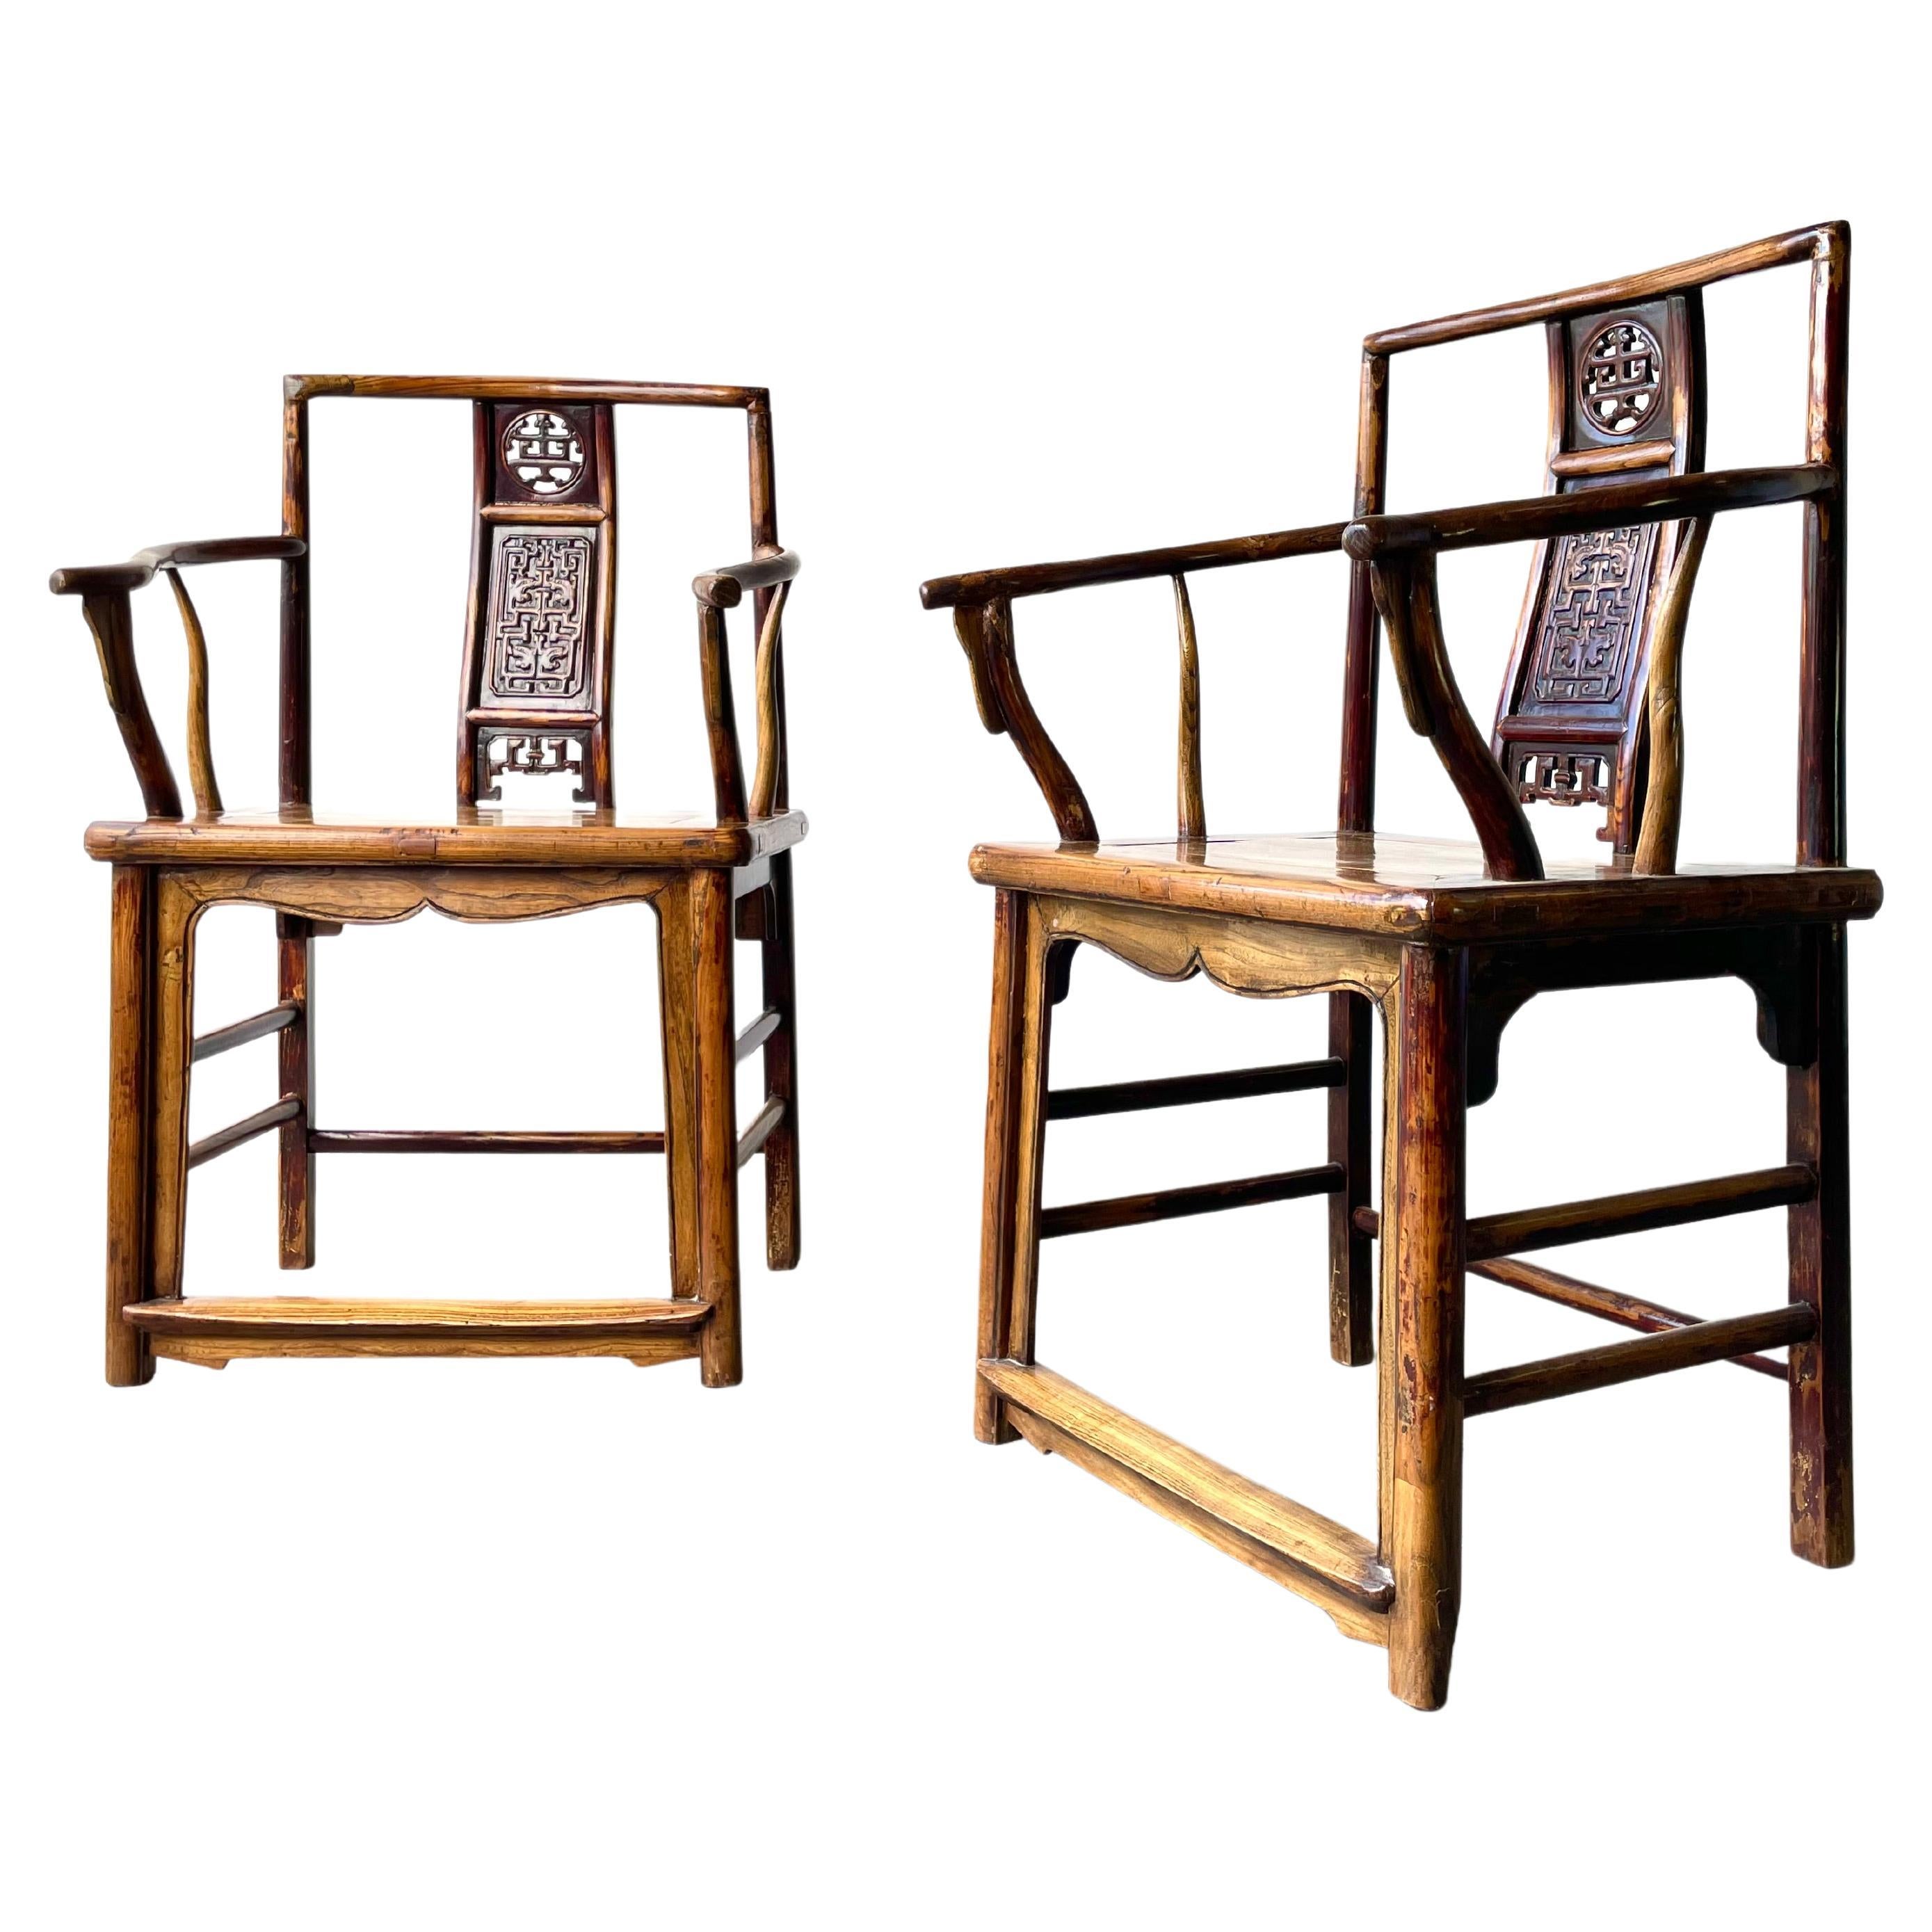 Gorgeous Pair of 19th, '1800's' Century Chinese Hardwood Arm Chairs For Sale